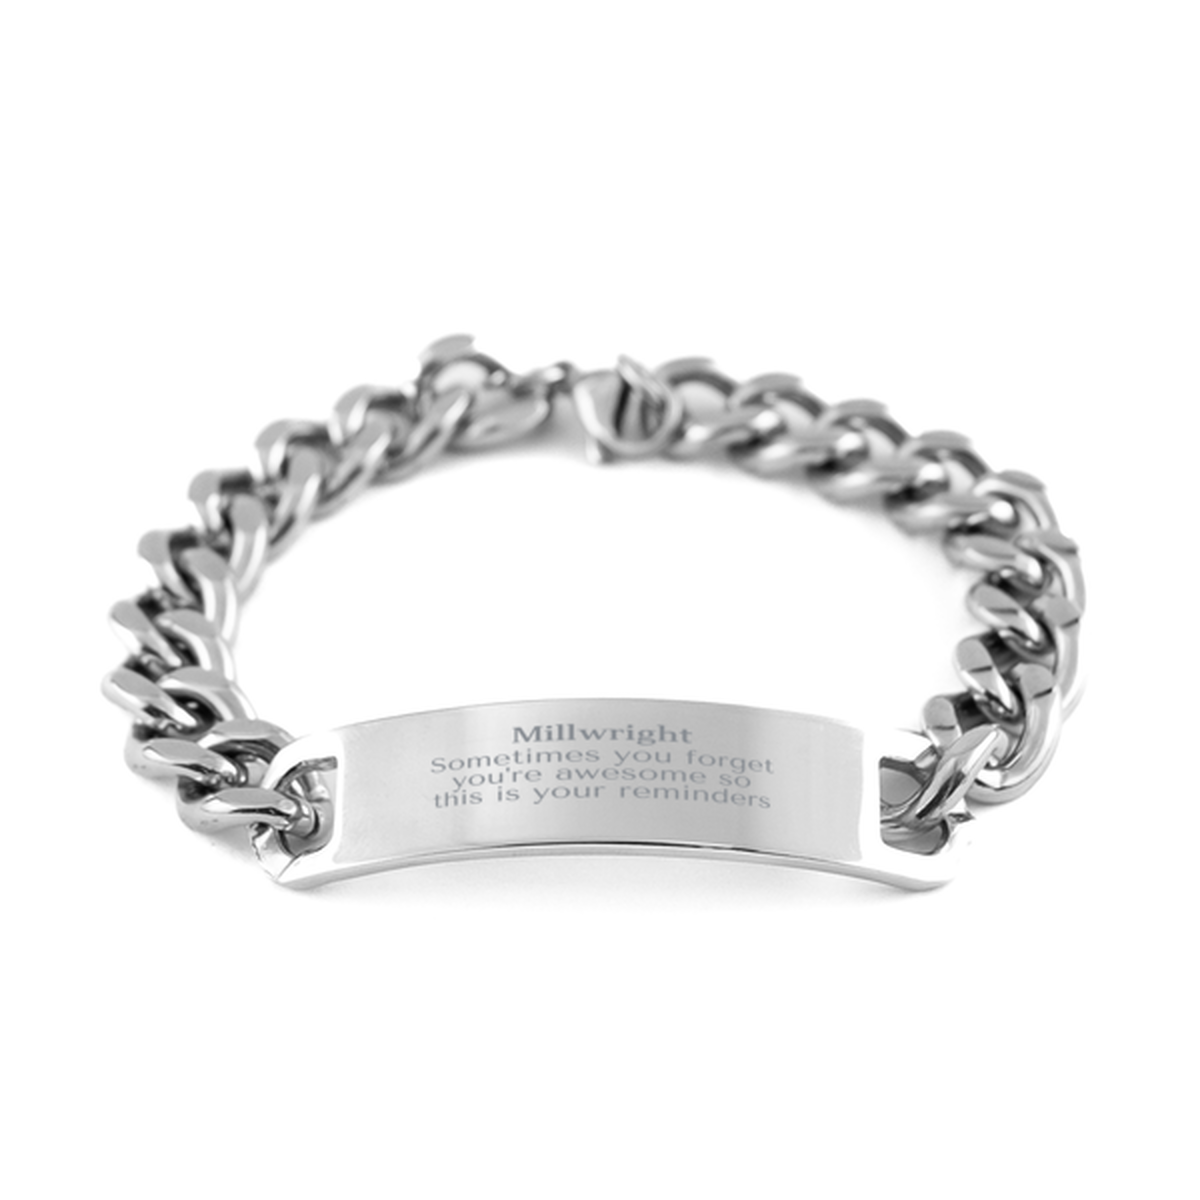 Sentimental Millwright Cuban Chain Stainless Steel Bracelet, Millwright Sometimes you forget you're awesome so this is your reminders, Graduation Christmas Birthday Gifts for Millwright, Men, Women, Coworkers